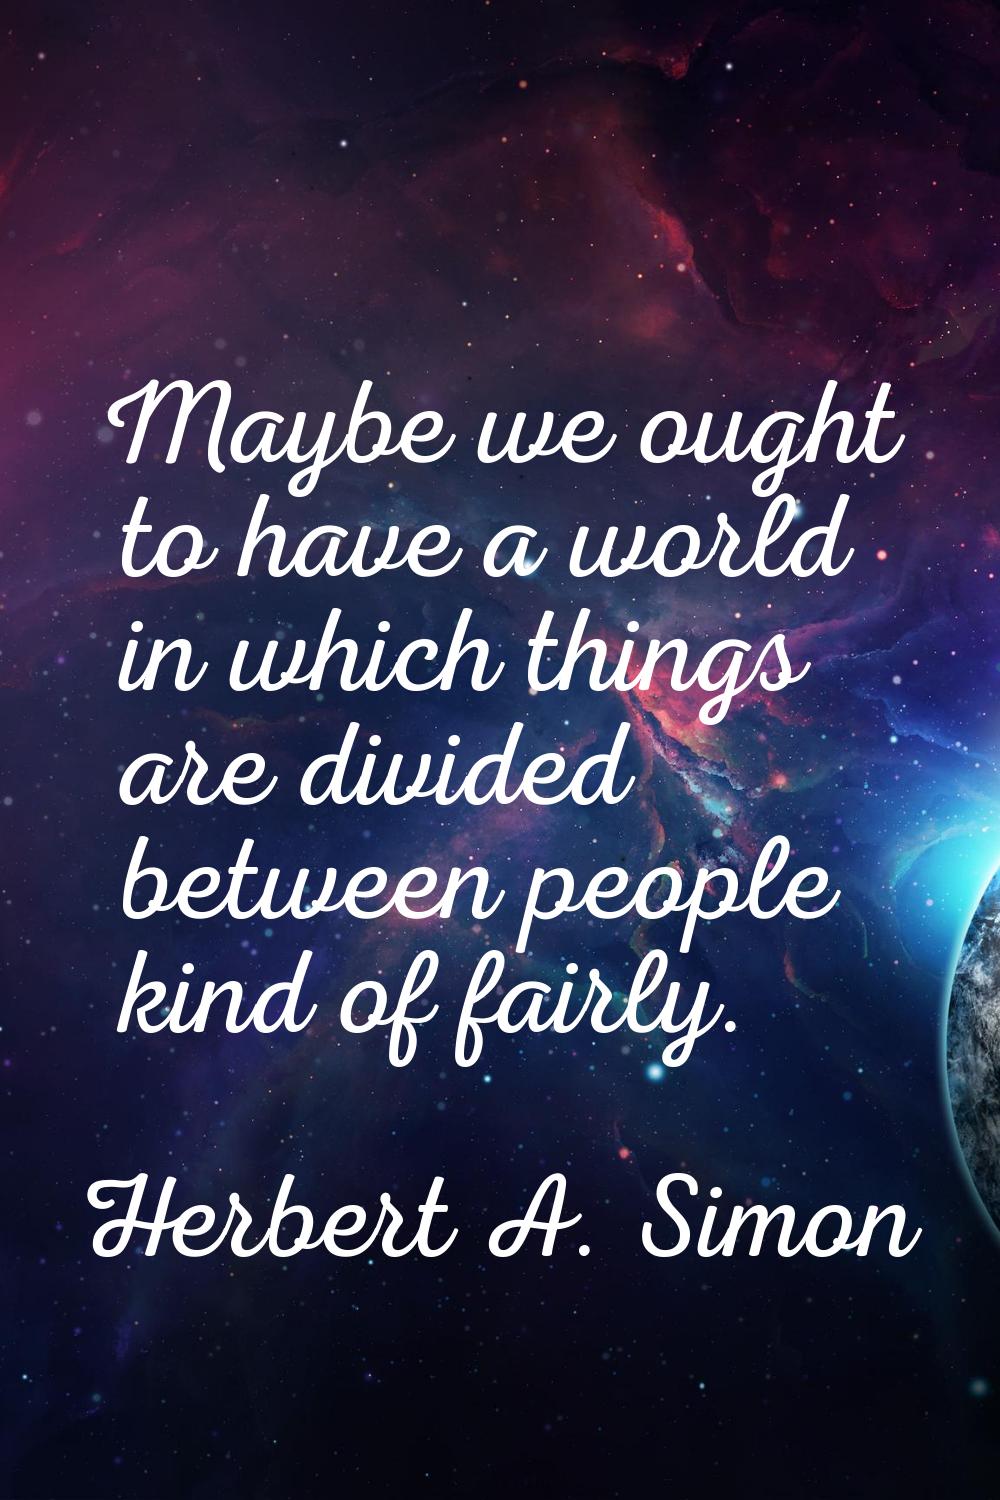 Maybe we ought to have a world in which things are divided between people kind of fairly.